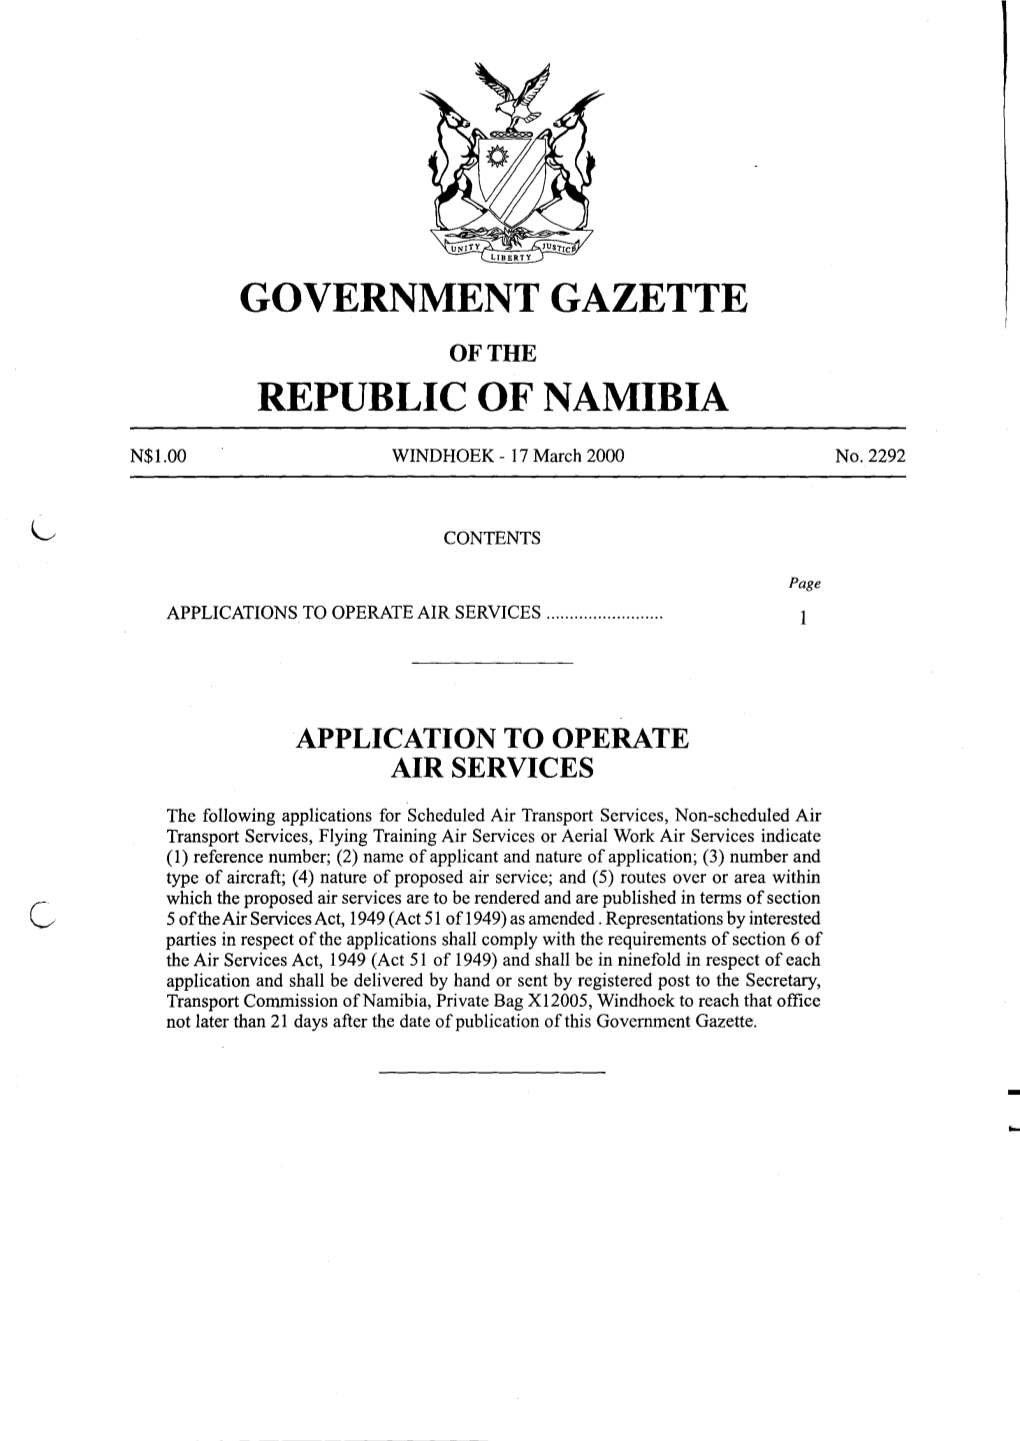 Government Gazette of the Republic of Namibia